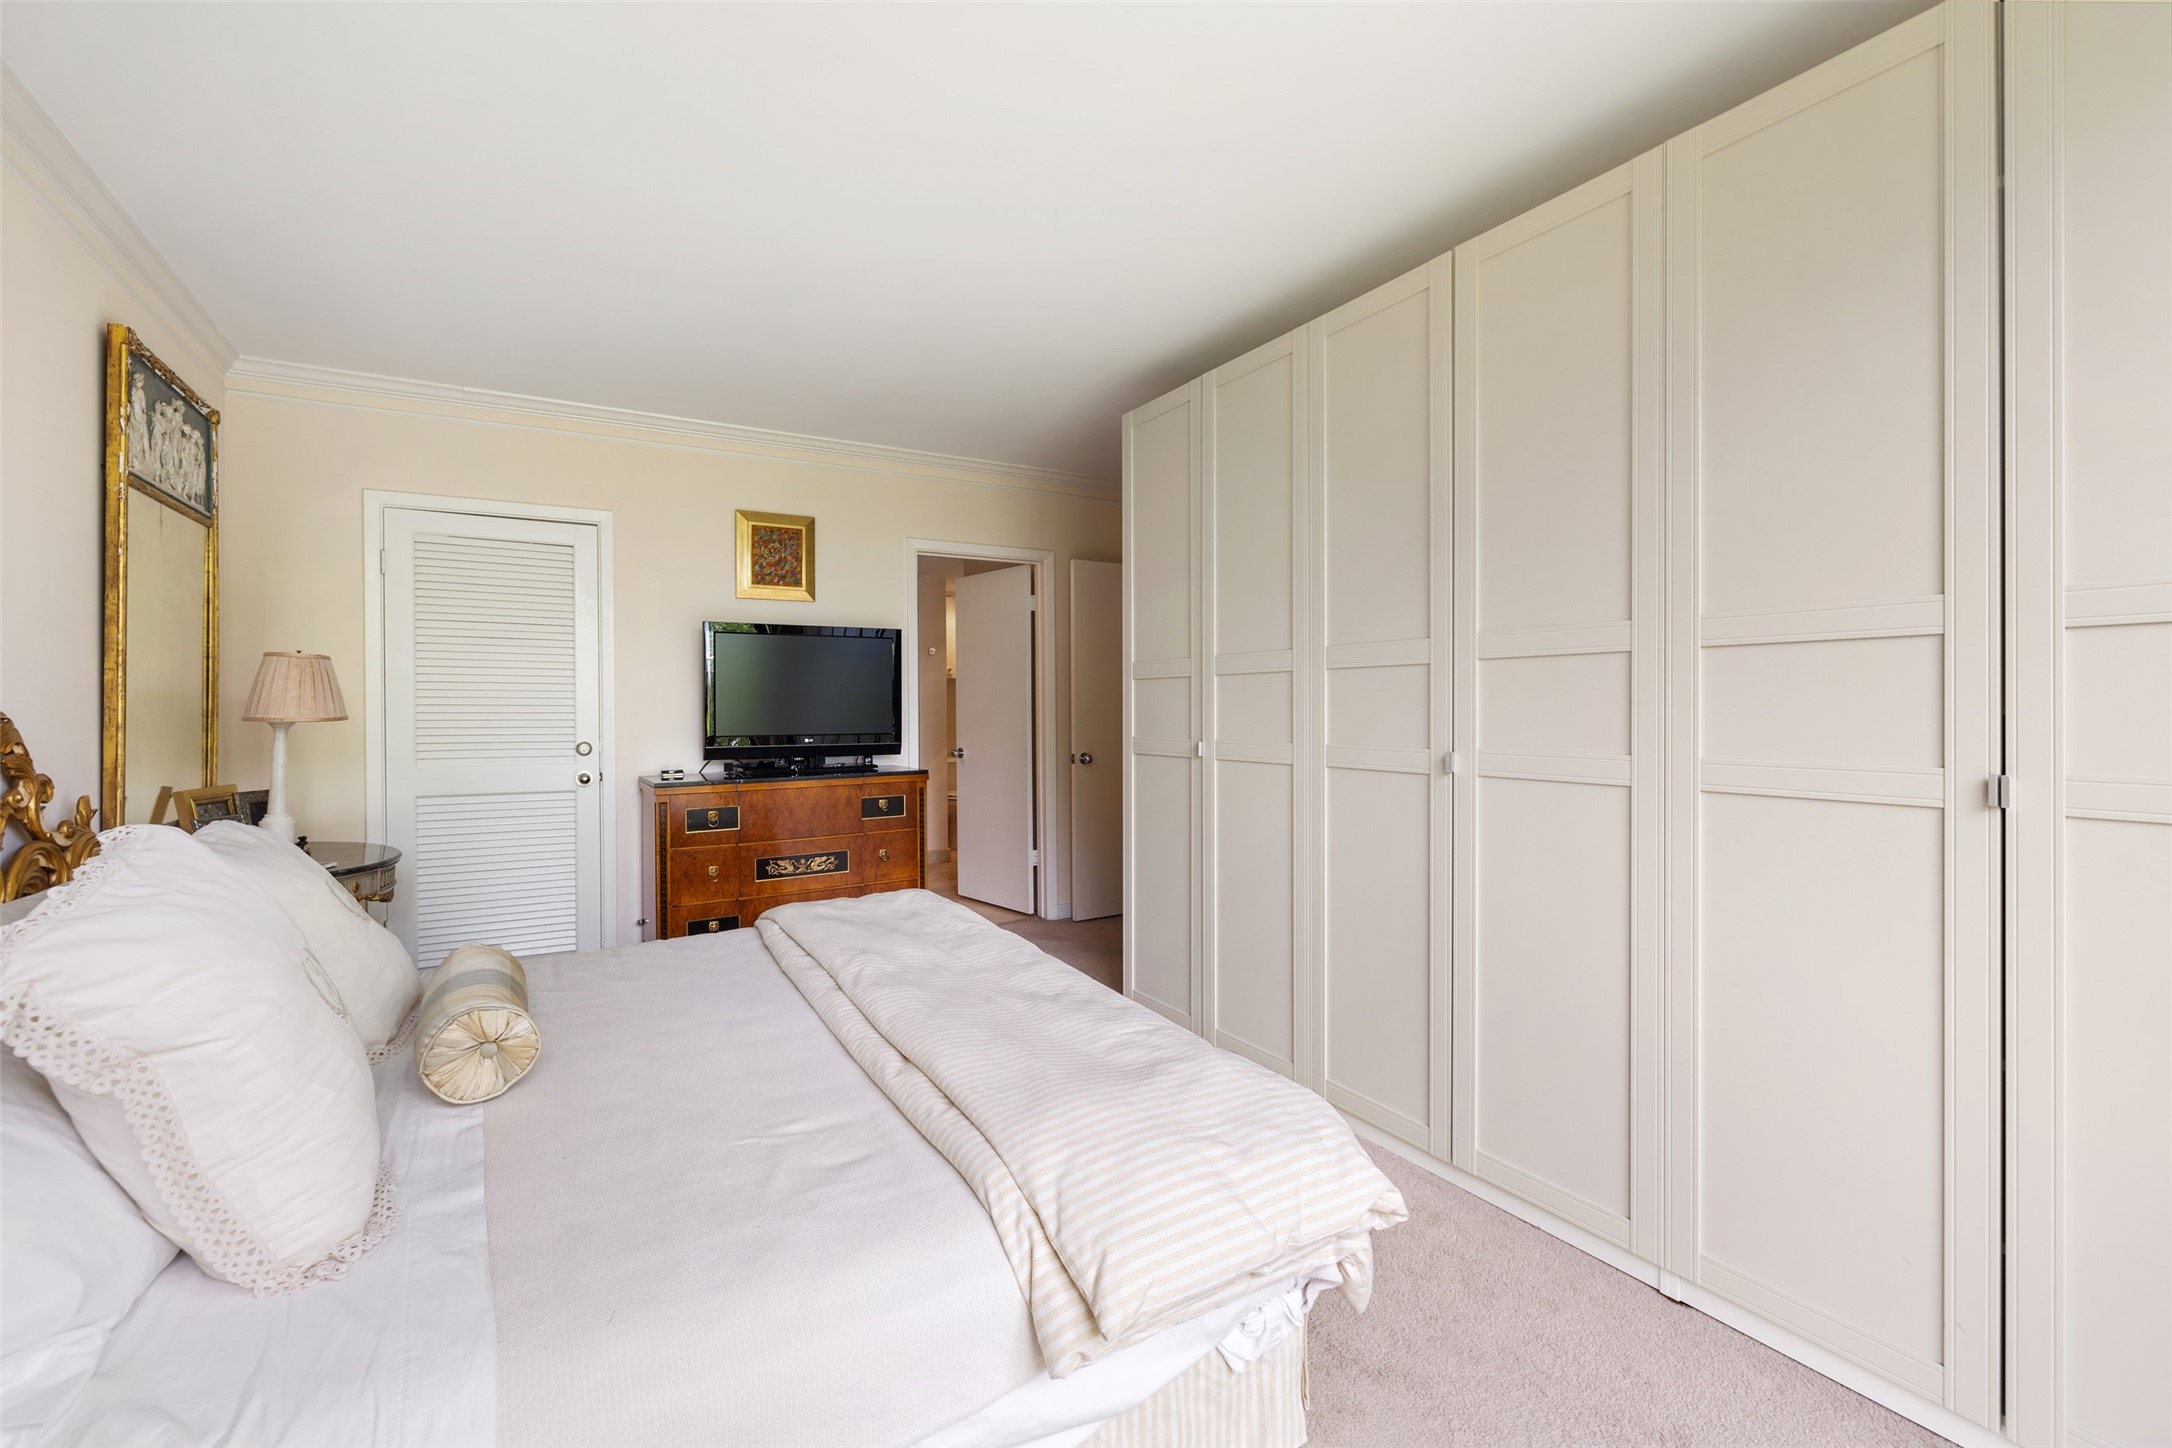 The primary bedroom has a plenty of room for extensive built in closet and storage system, as well as a separate walk-in closet.